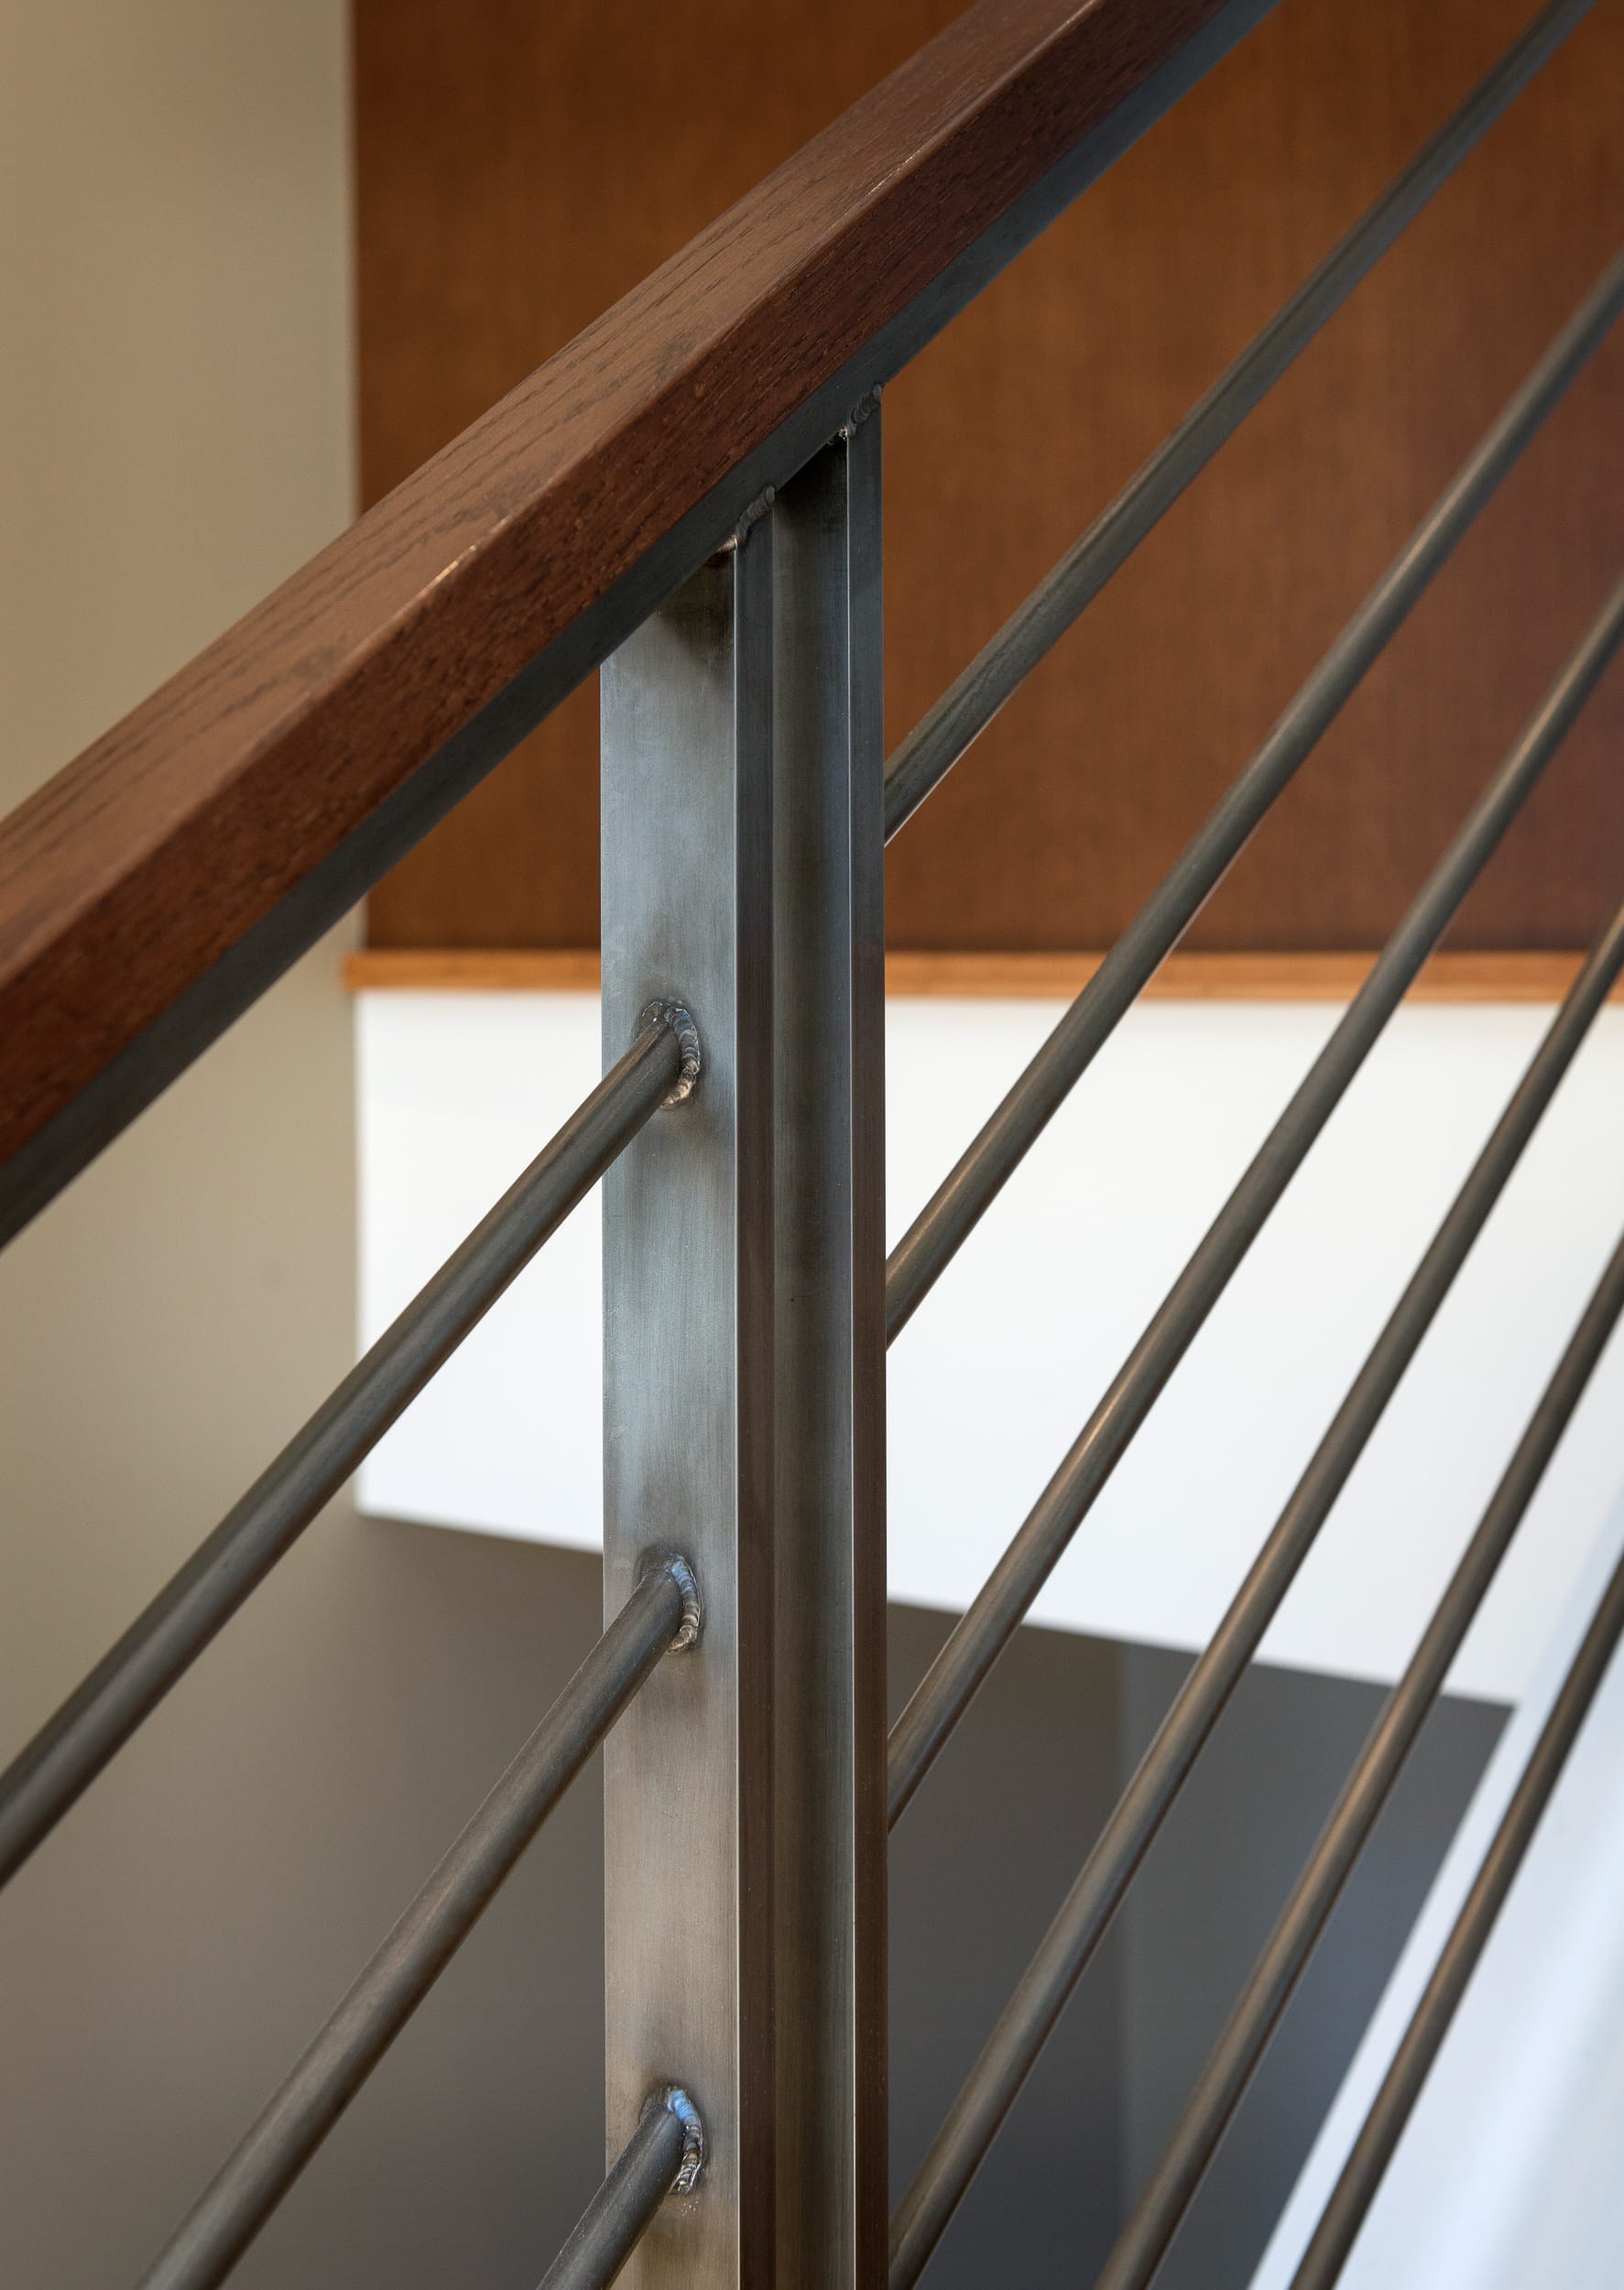 A close up of a metal railing in a home.